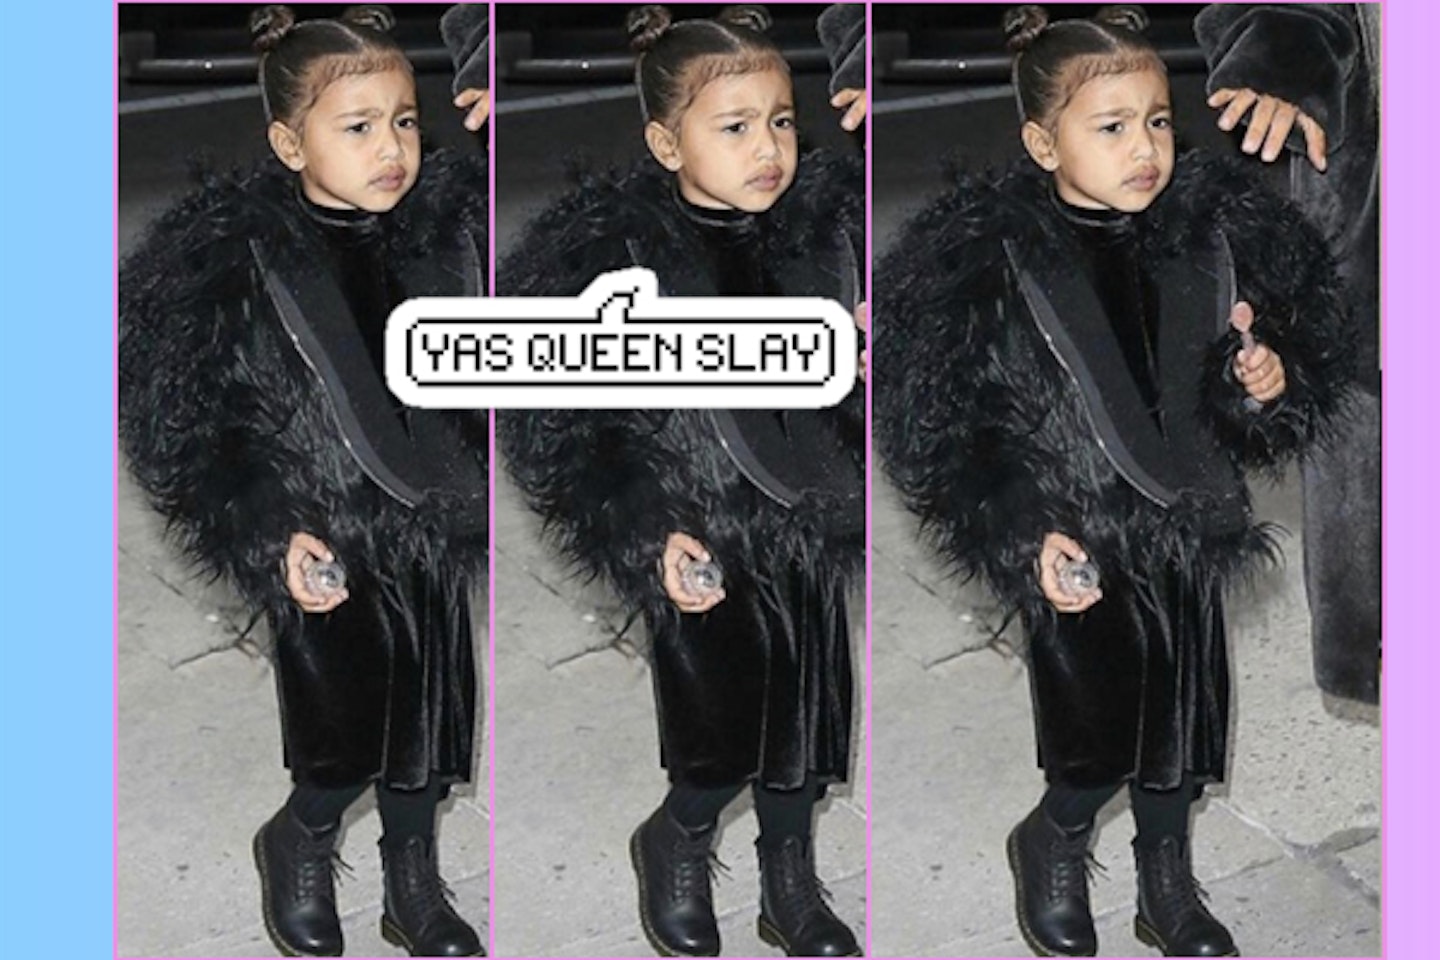 North west looking sassy